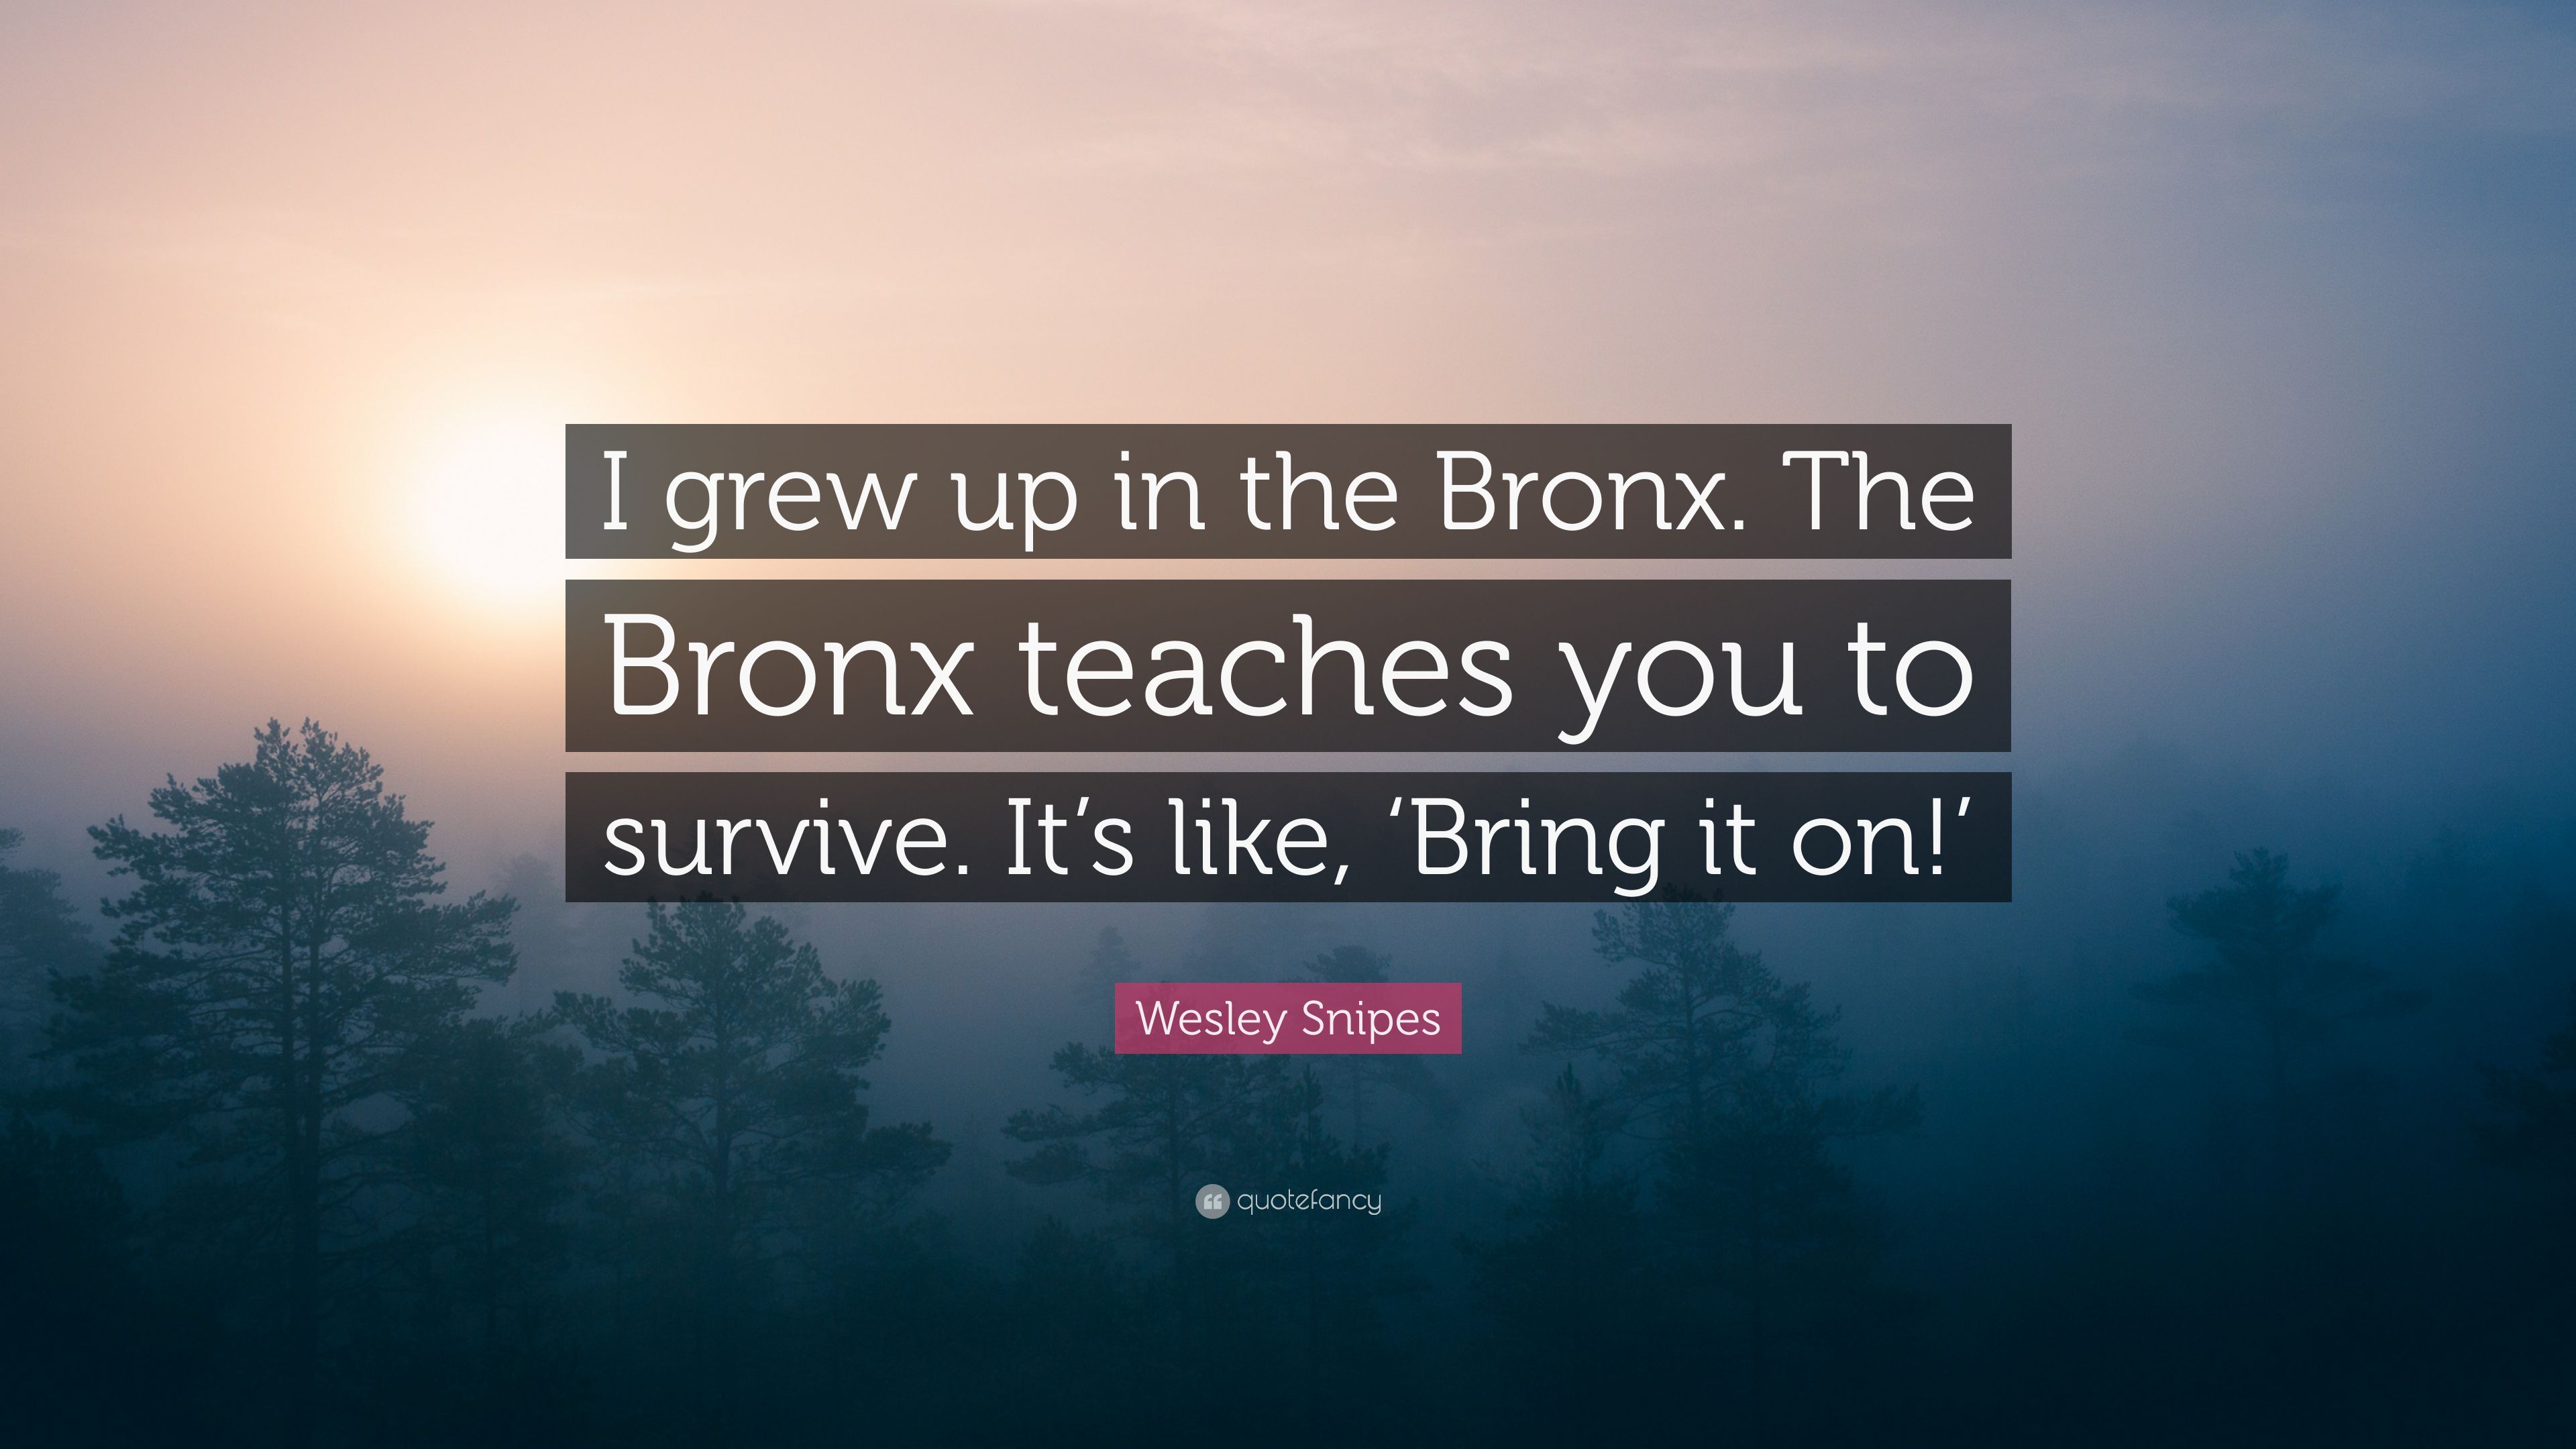 Wesley Snipes Quote: “I grew up in the Bronx. The Bronx teaches